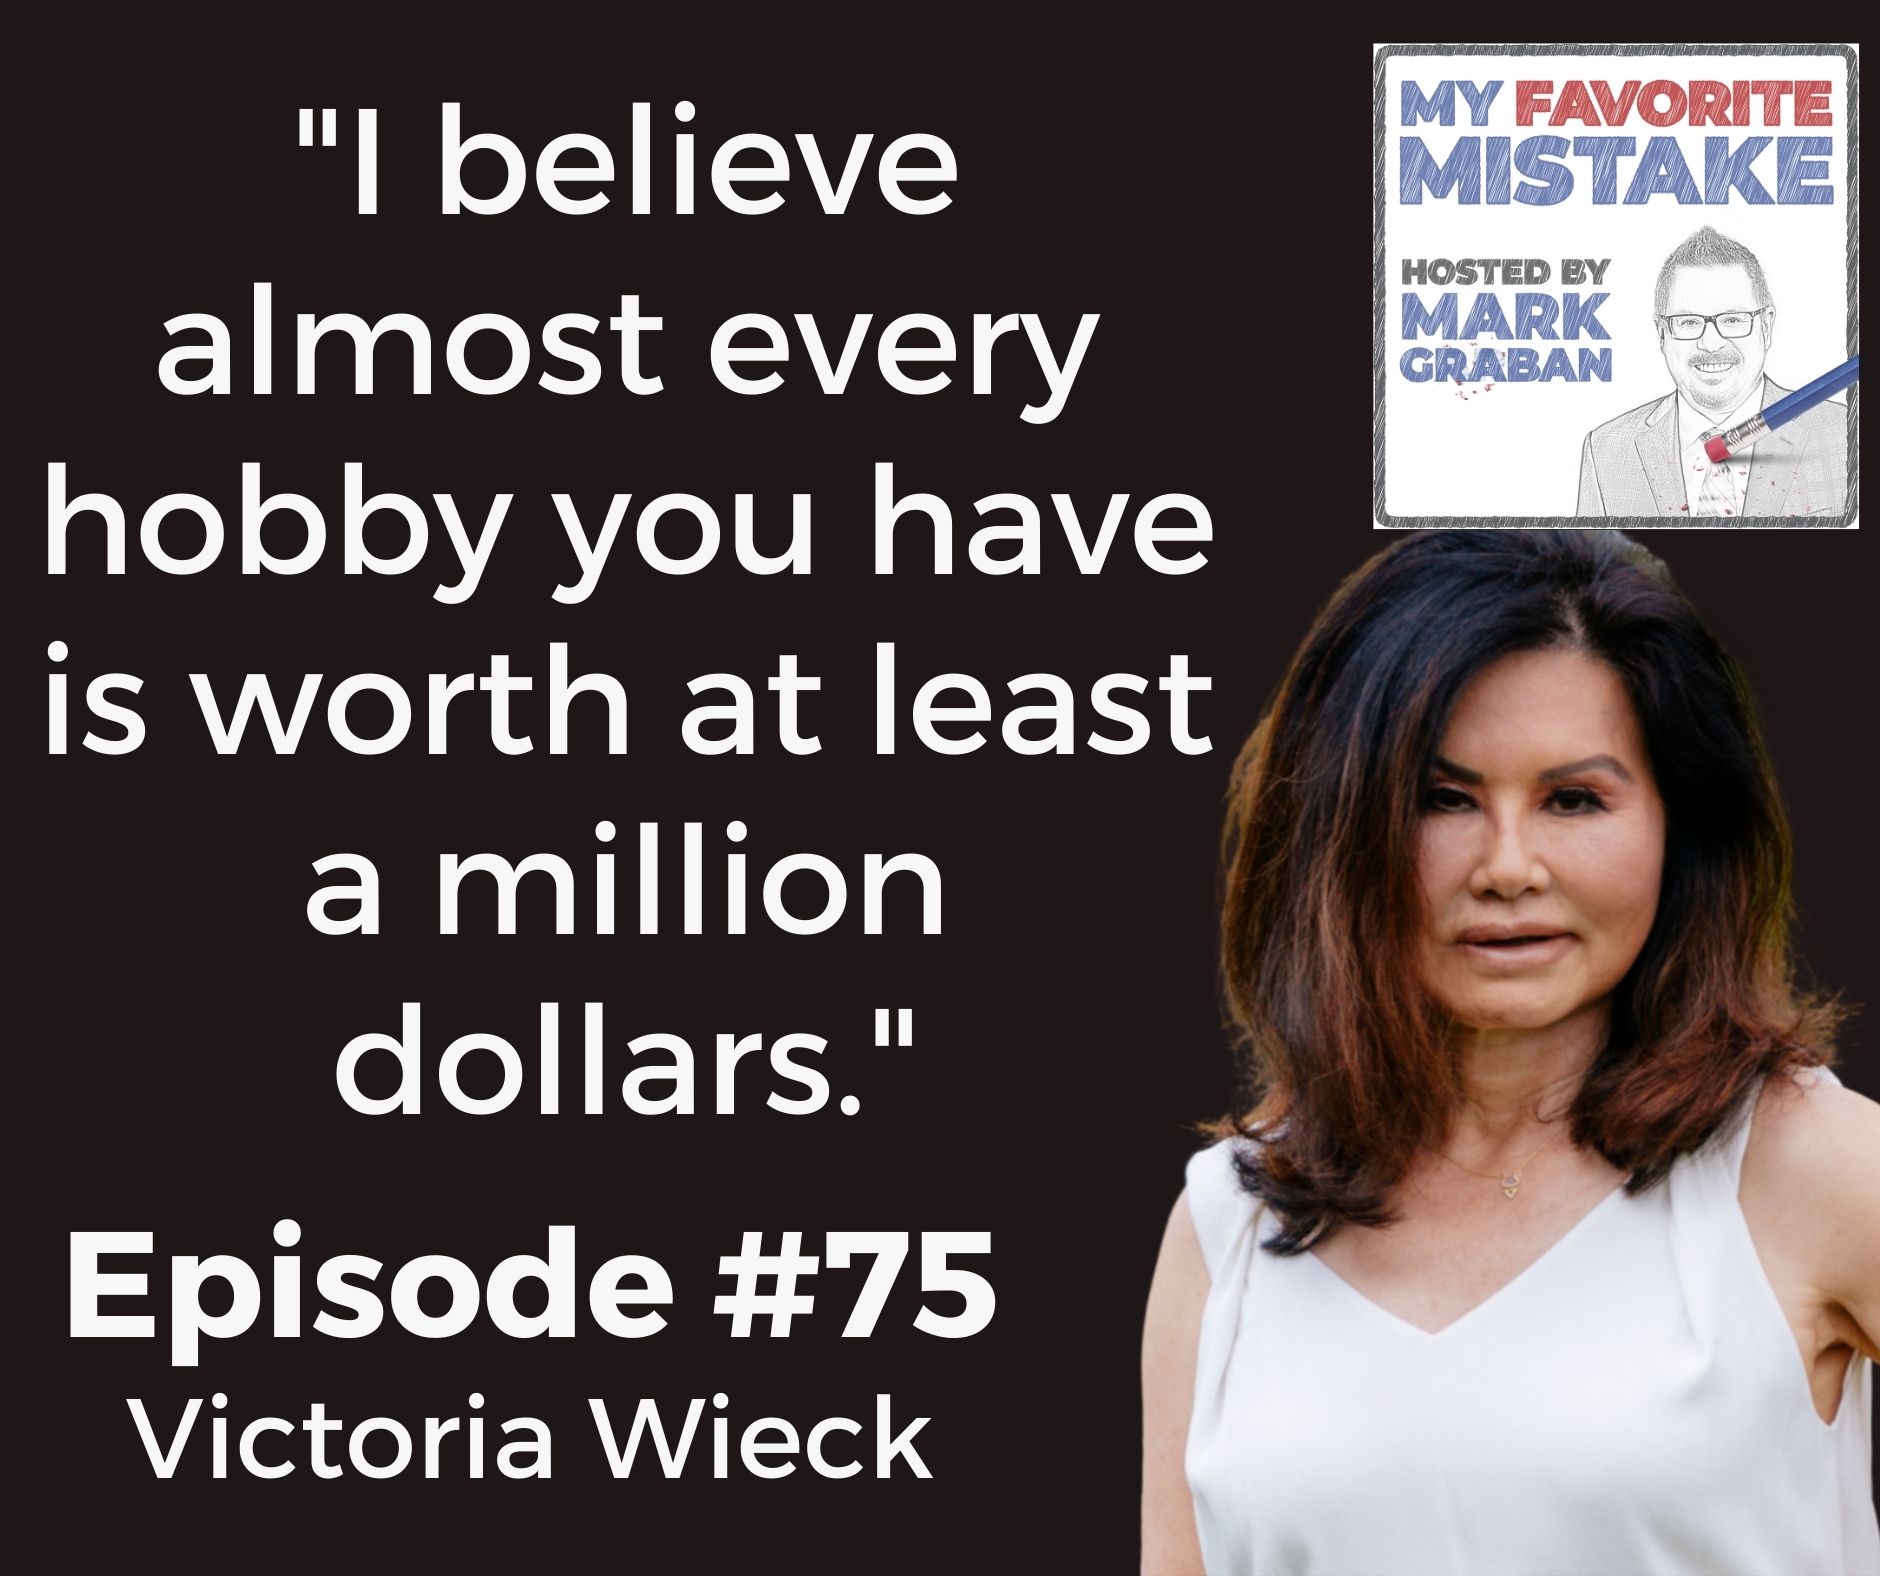 "I believe almost every hobby you have is worth at least a million dollars."